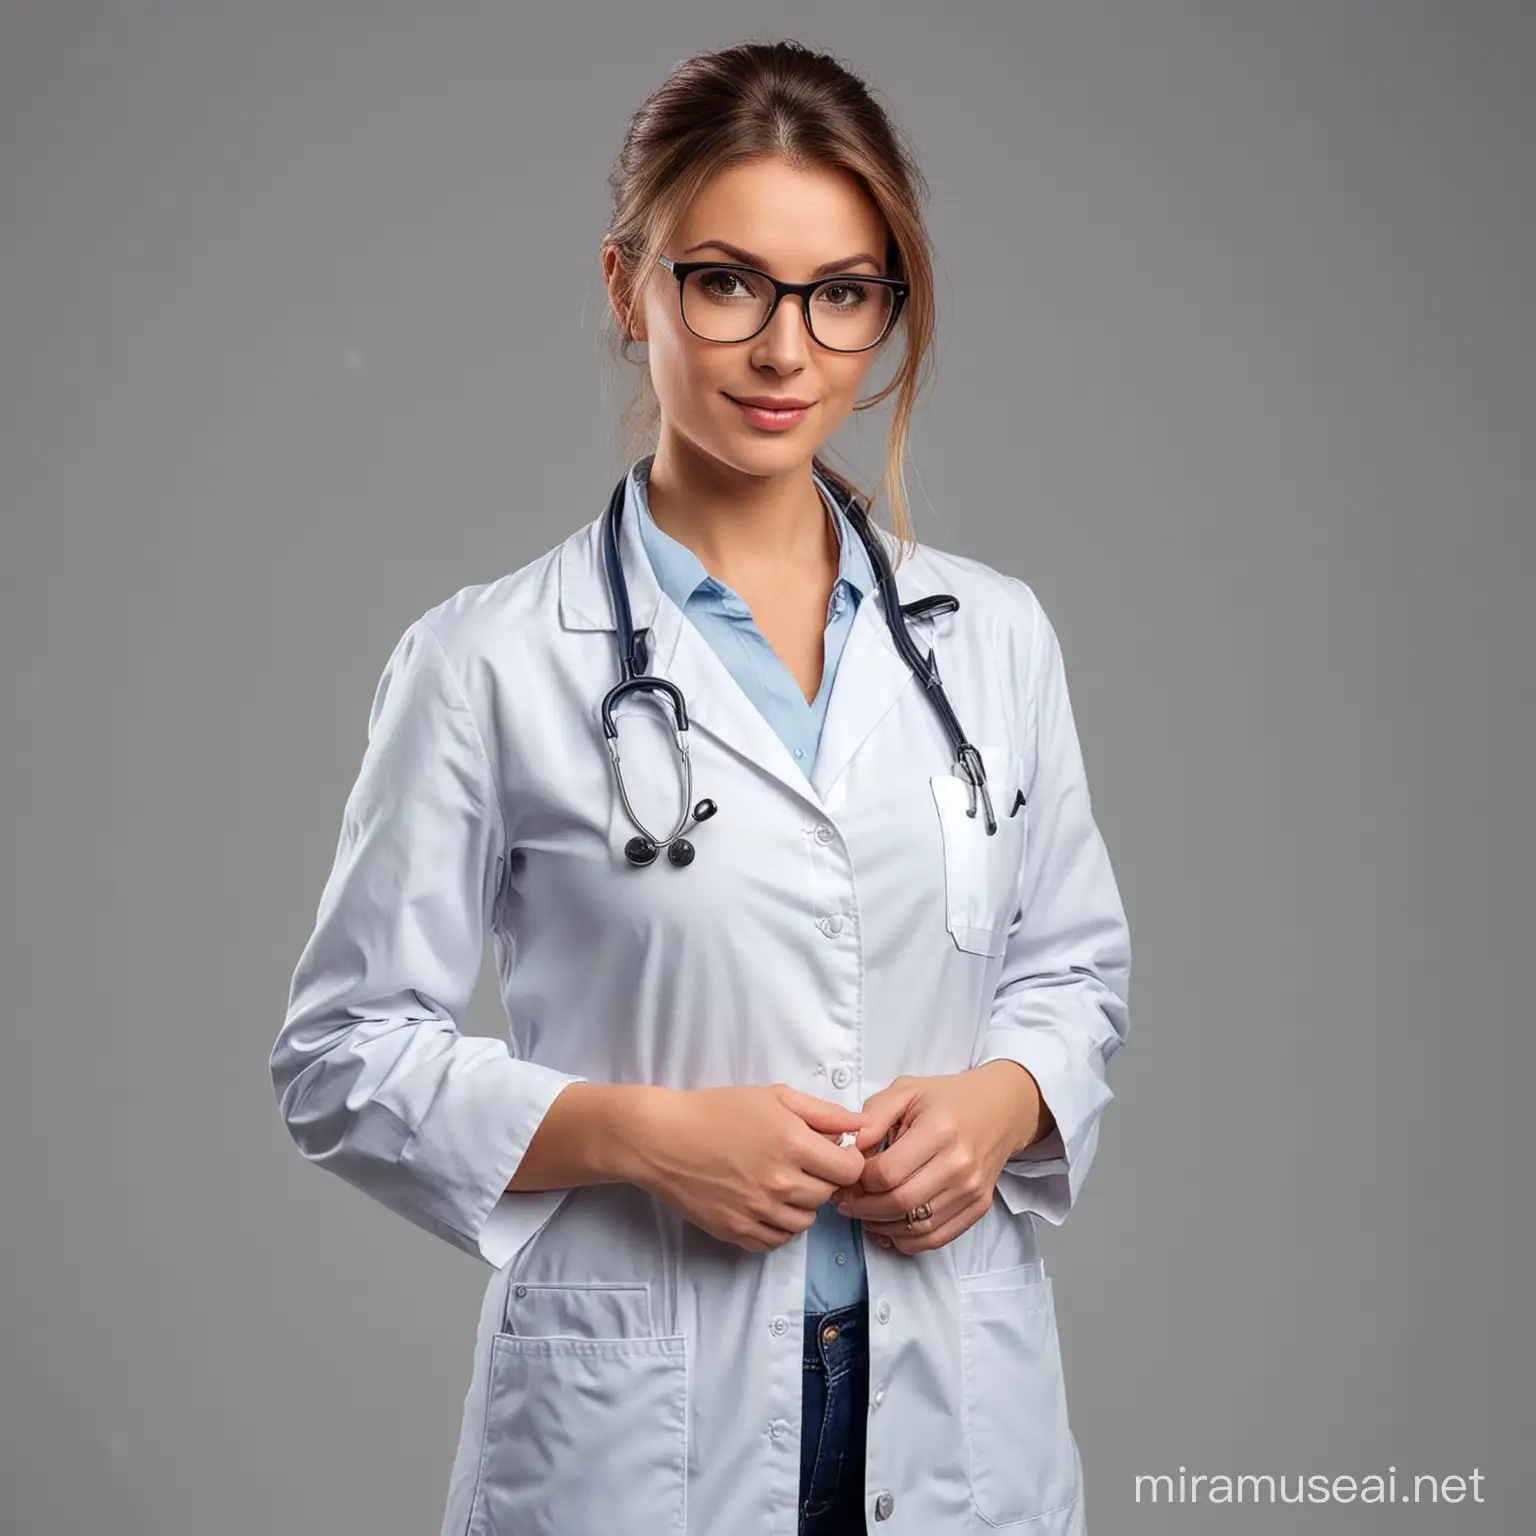 Professional Female Doctor Wearing Glasses with Hands in Pockets